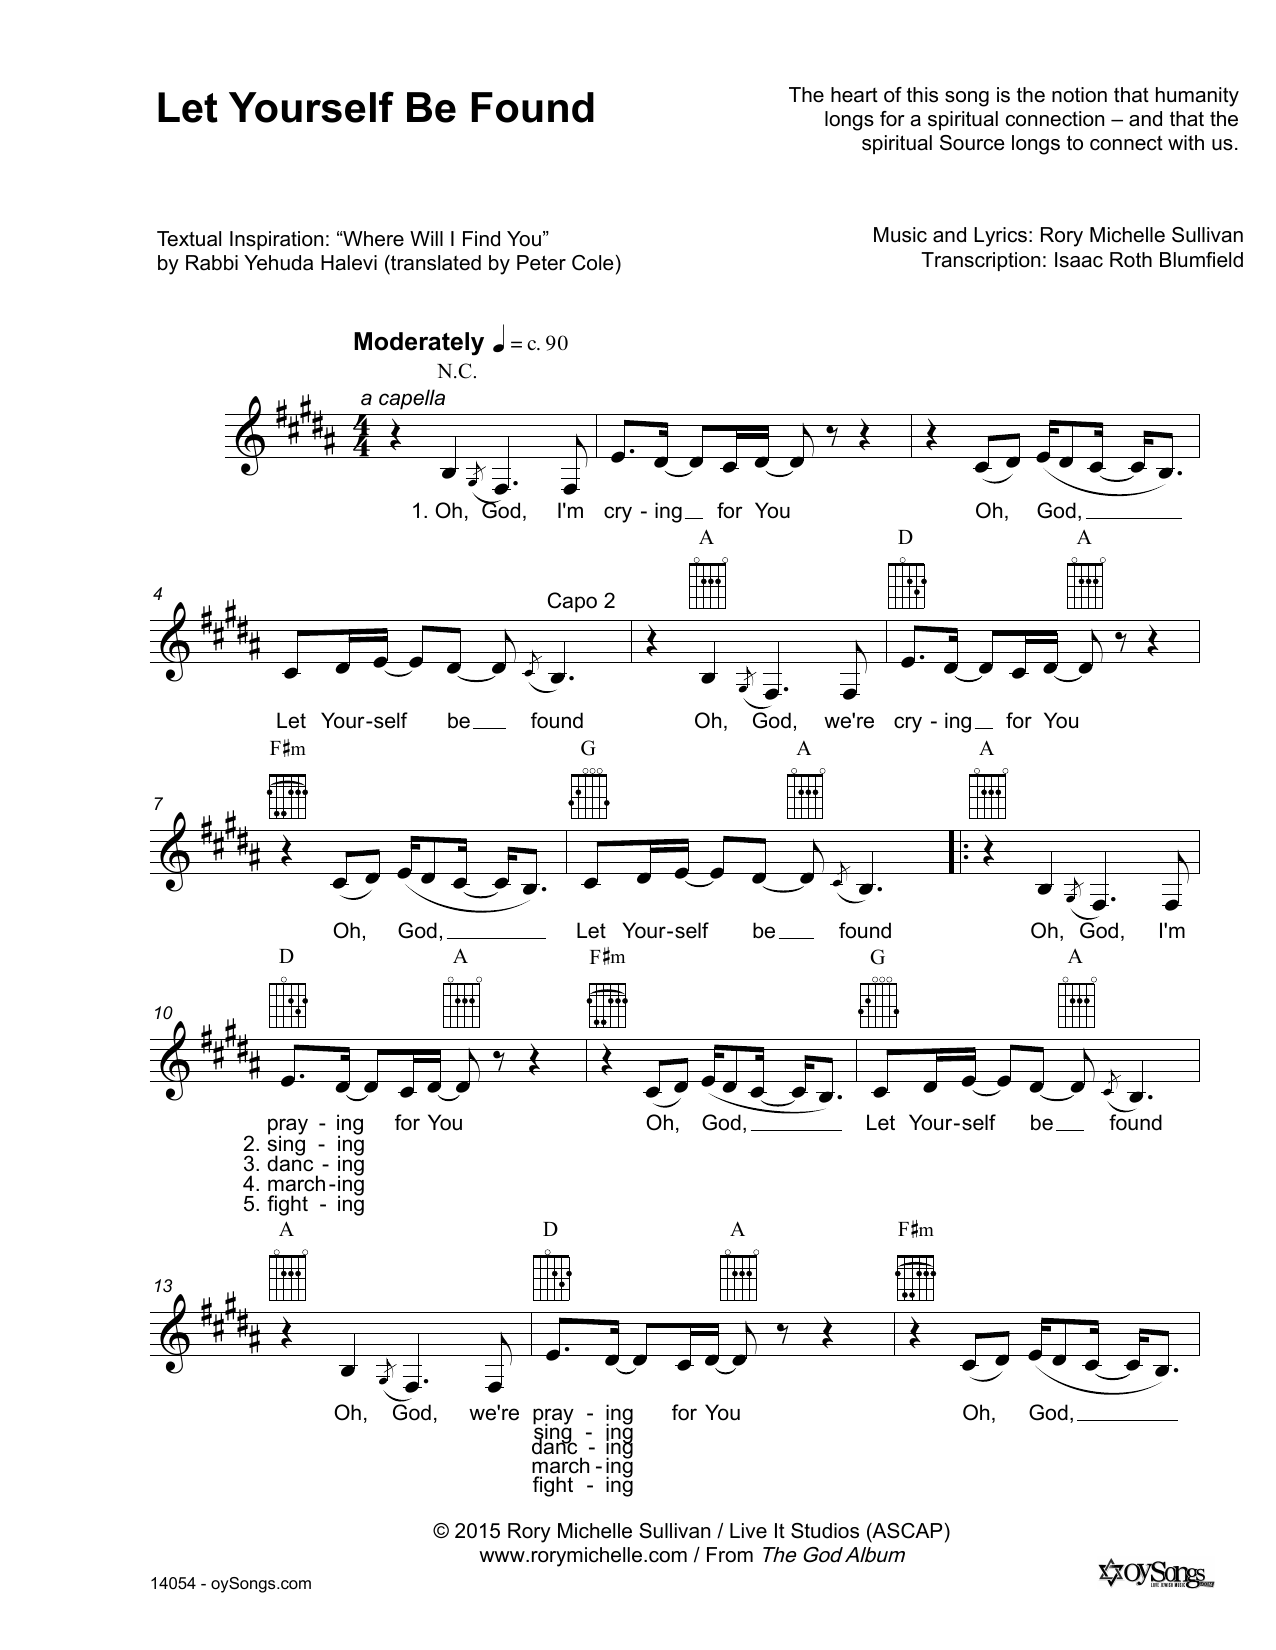 Download Rory Michelle Sullivan Let Yourself Be Found Sheet Music